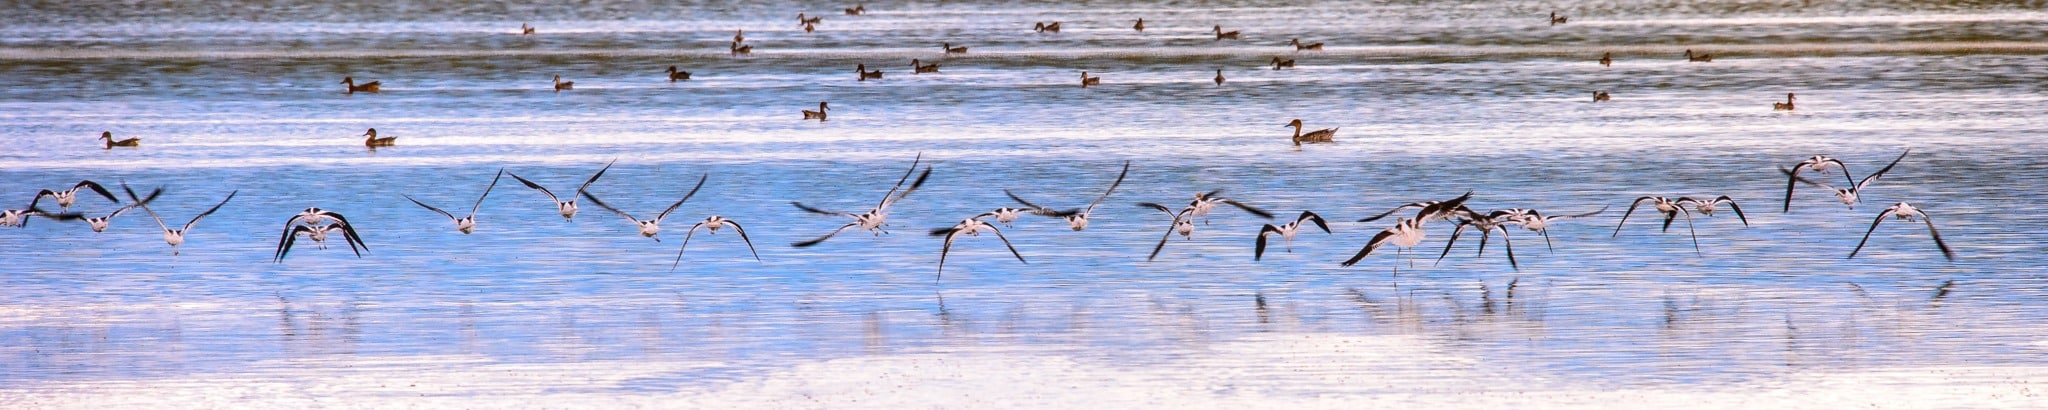 American Avocets take flight from one of several ponds located in the Blanca Wildlife Habitat Area in the San Luis Valley near Alamosa, Colorado, in this panorama.